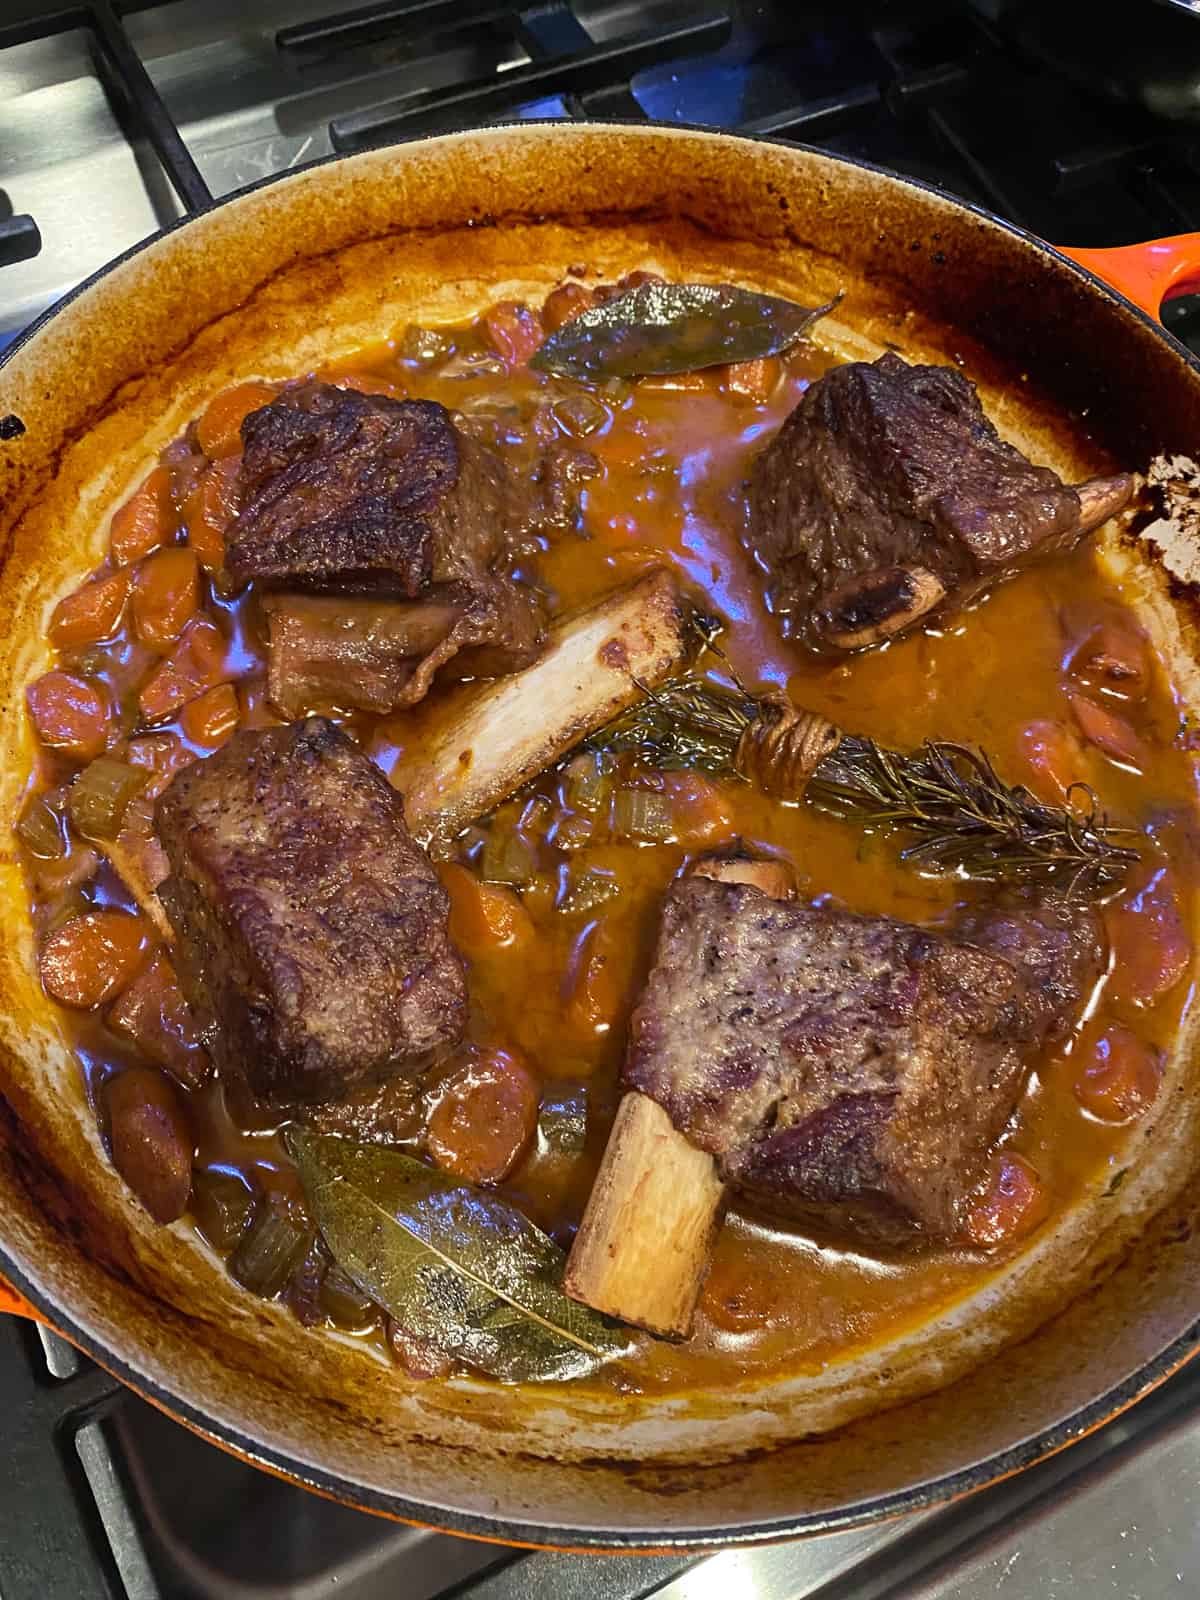 Slow cooked short ribs right out of the oven.